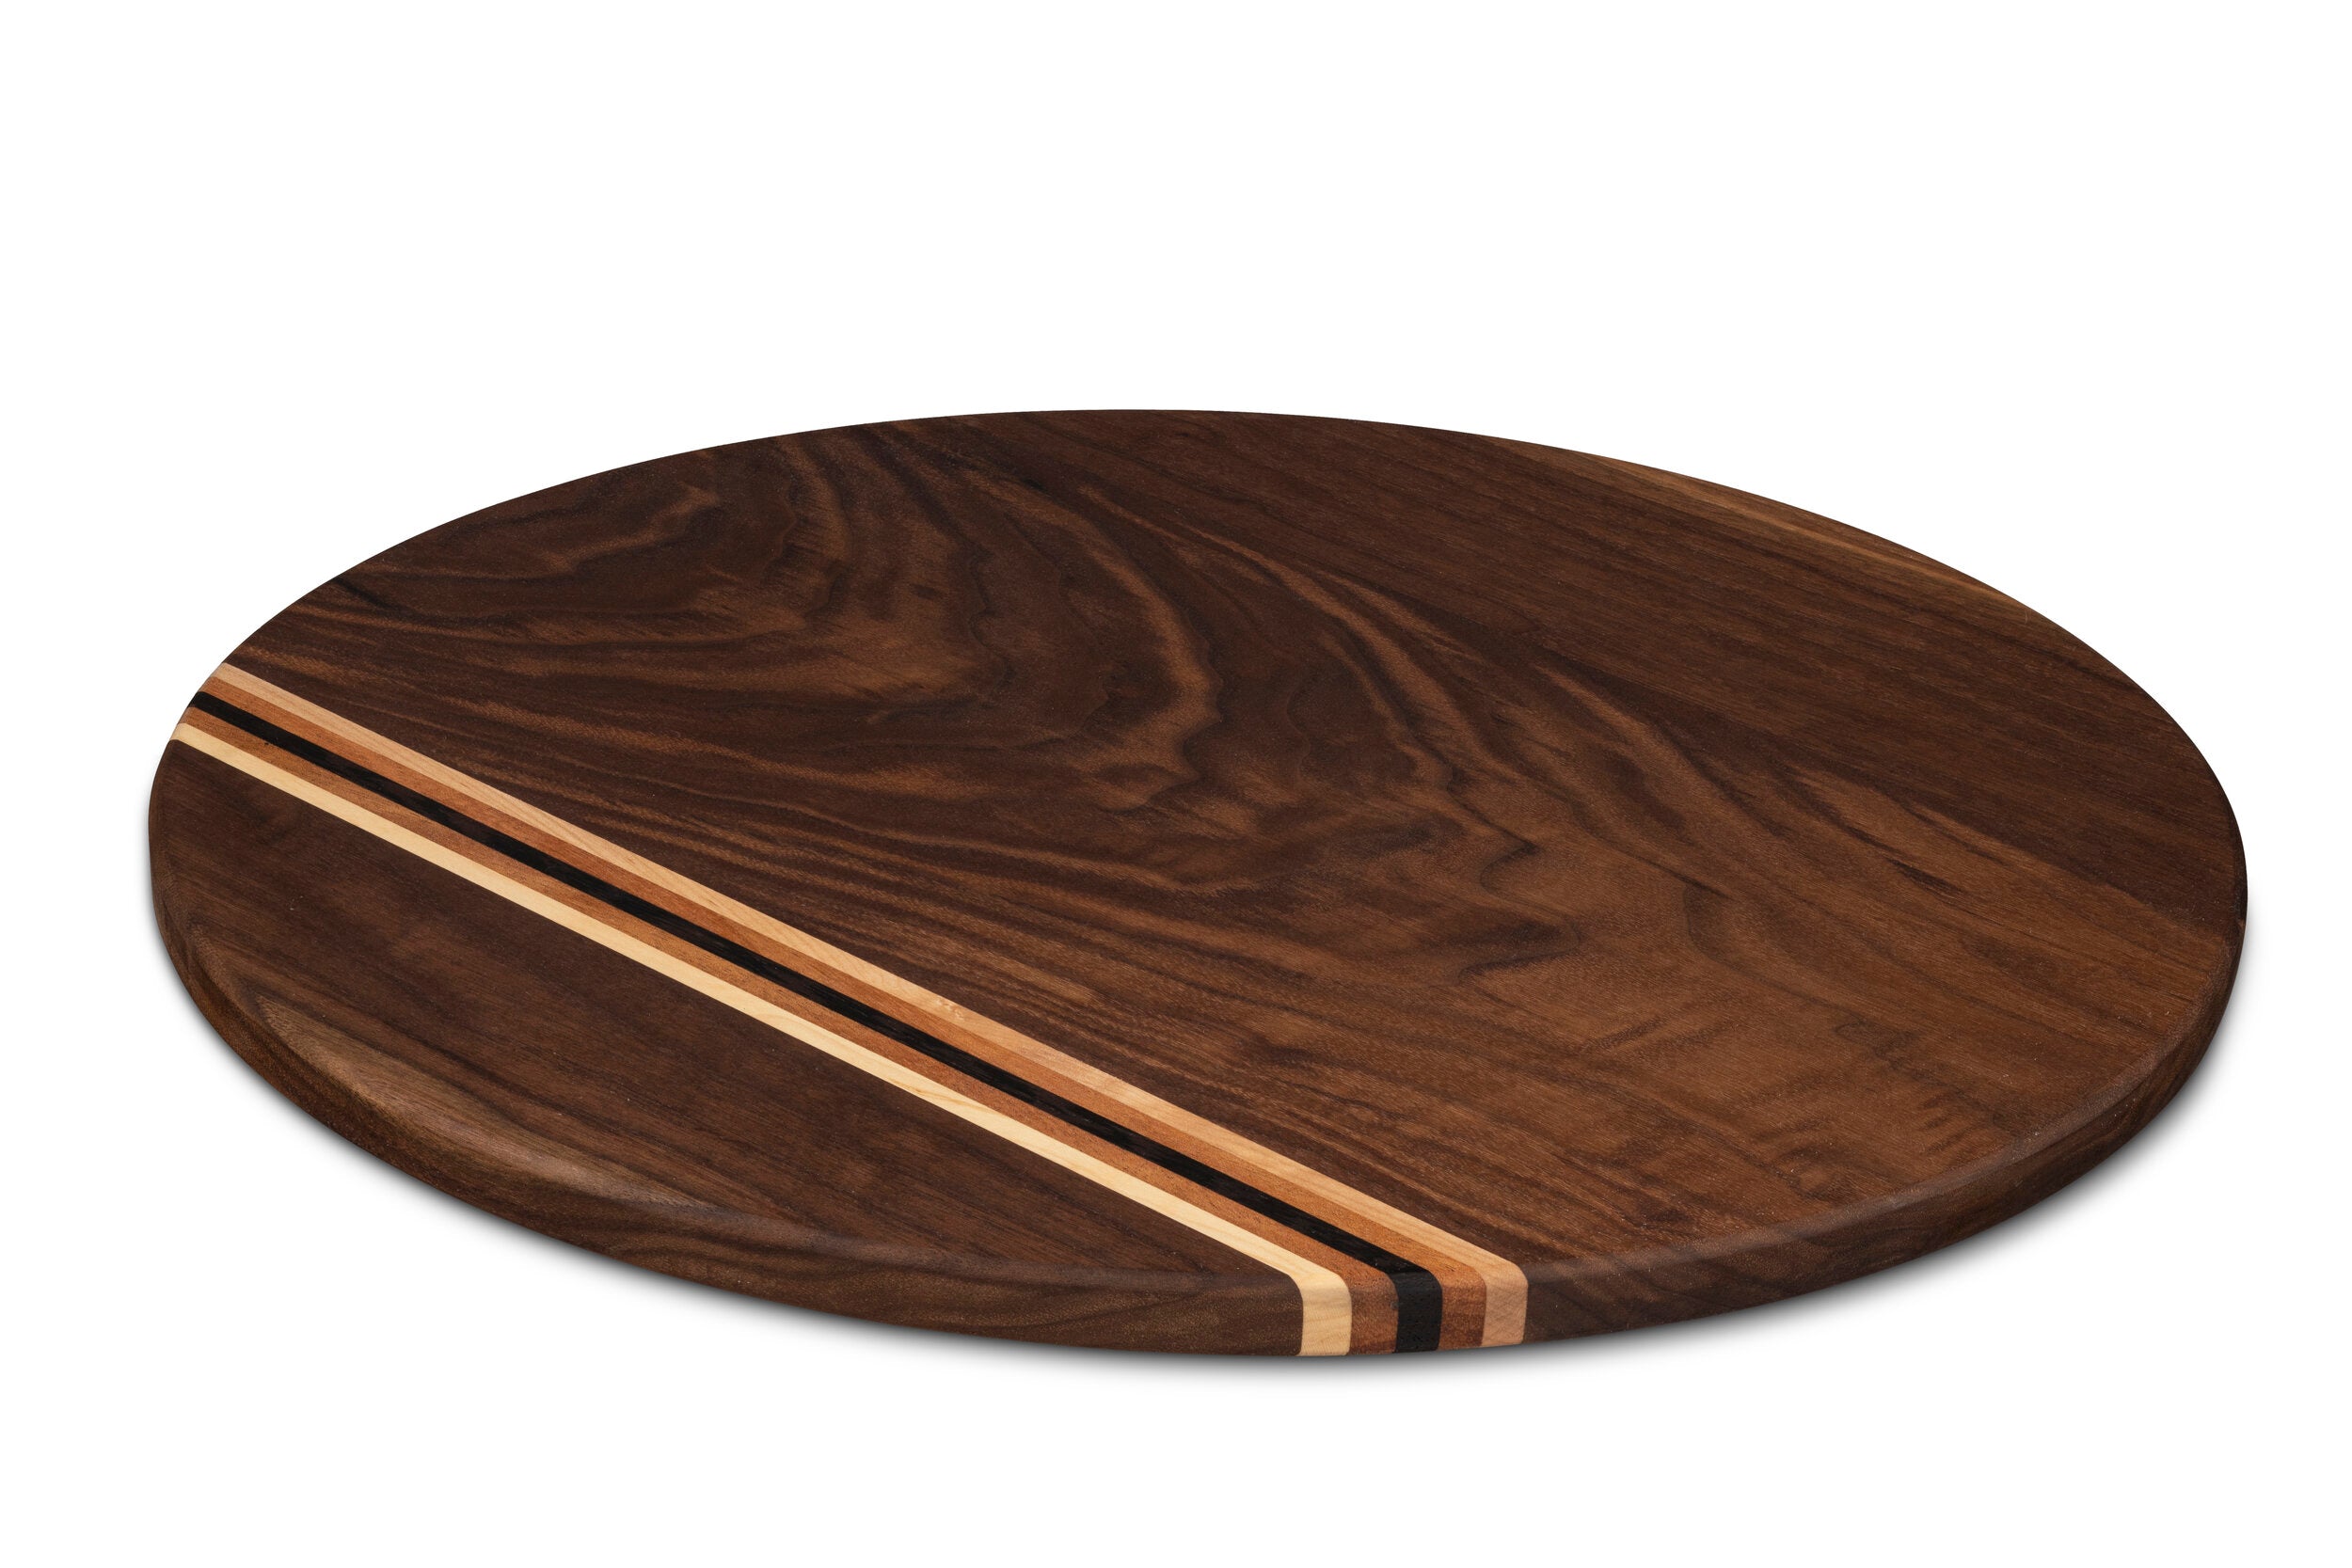 18" Round Walnut Charcuterie and Cheese Board